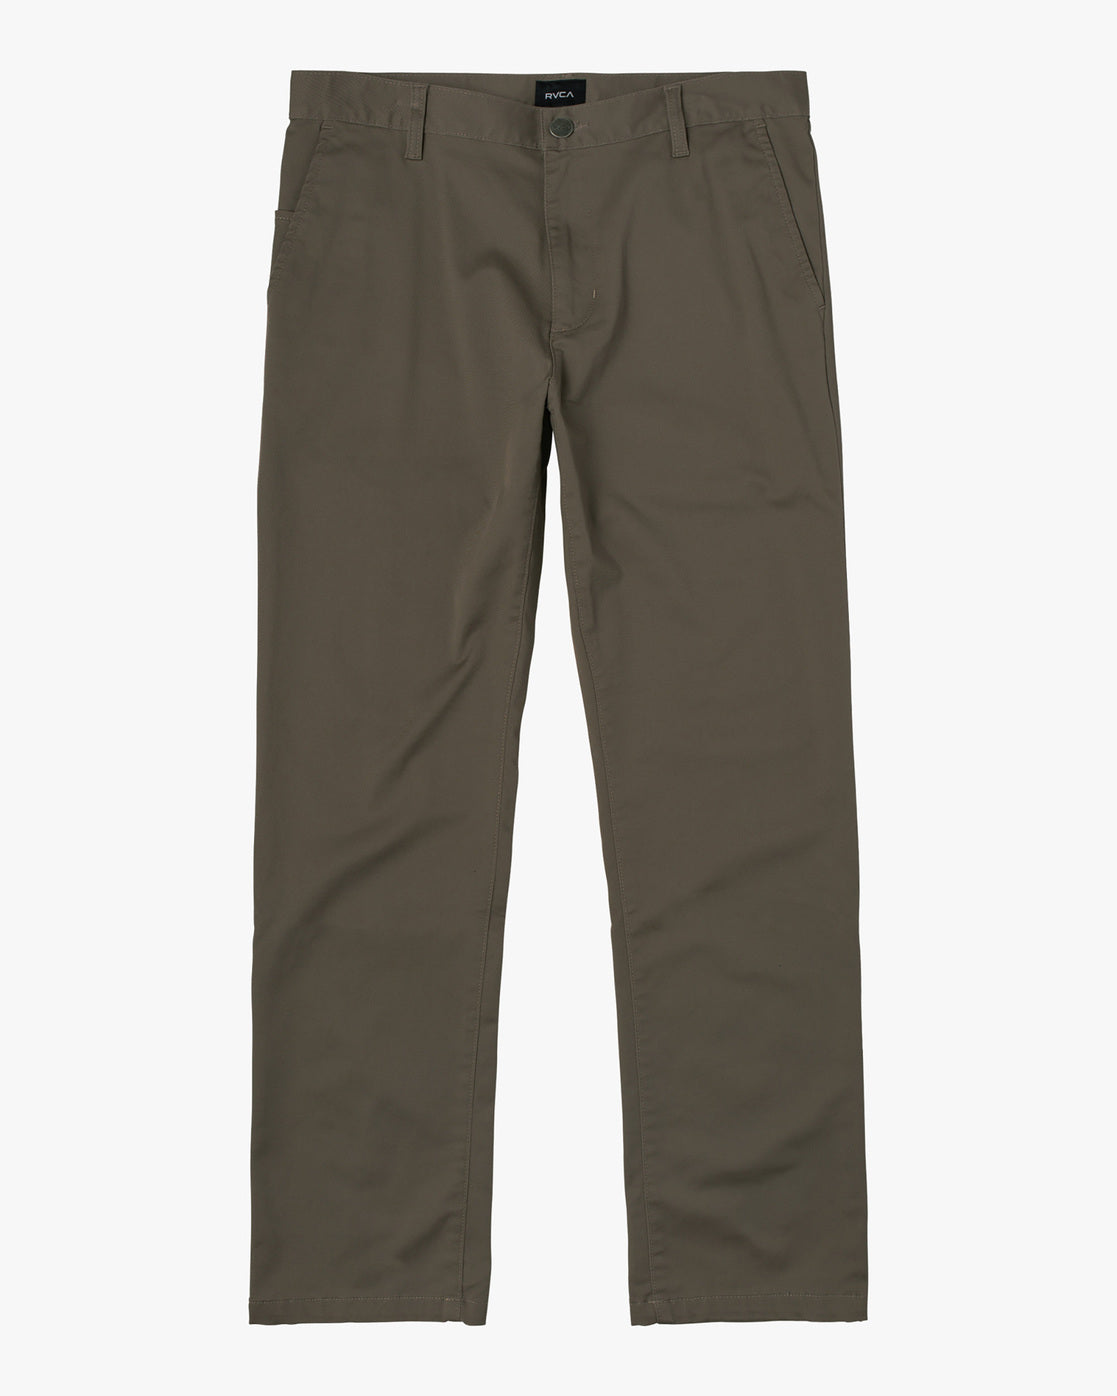 Weekend Stretch Chino Pants - Olive